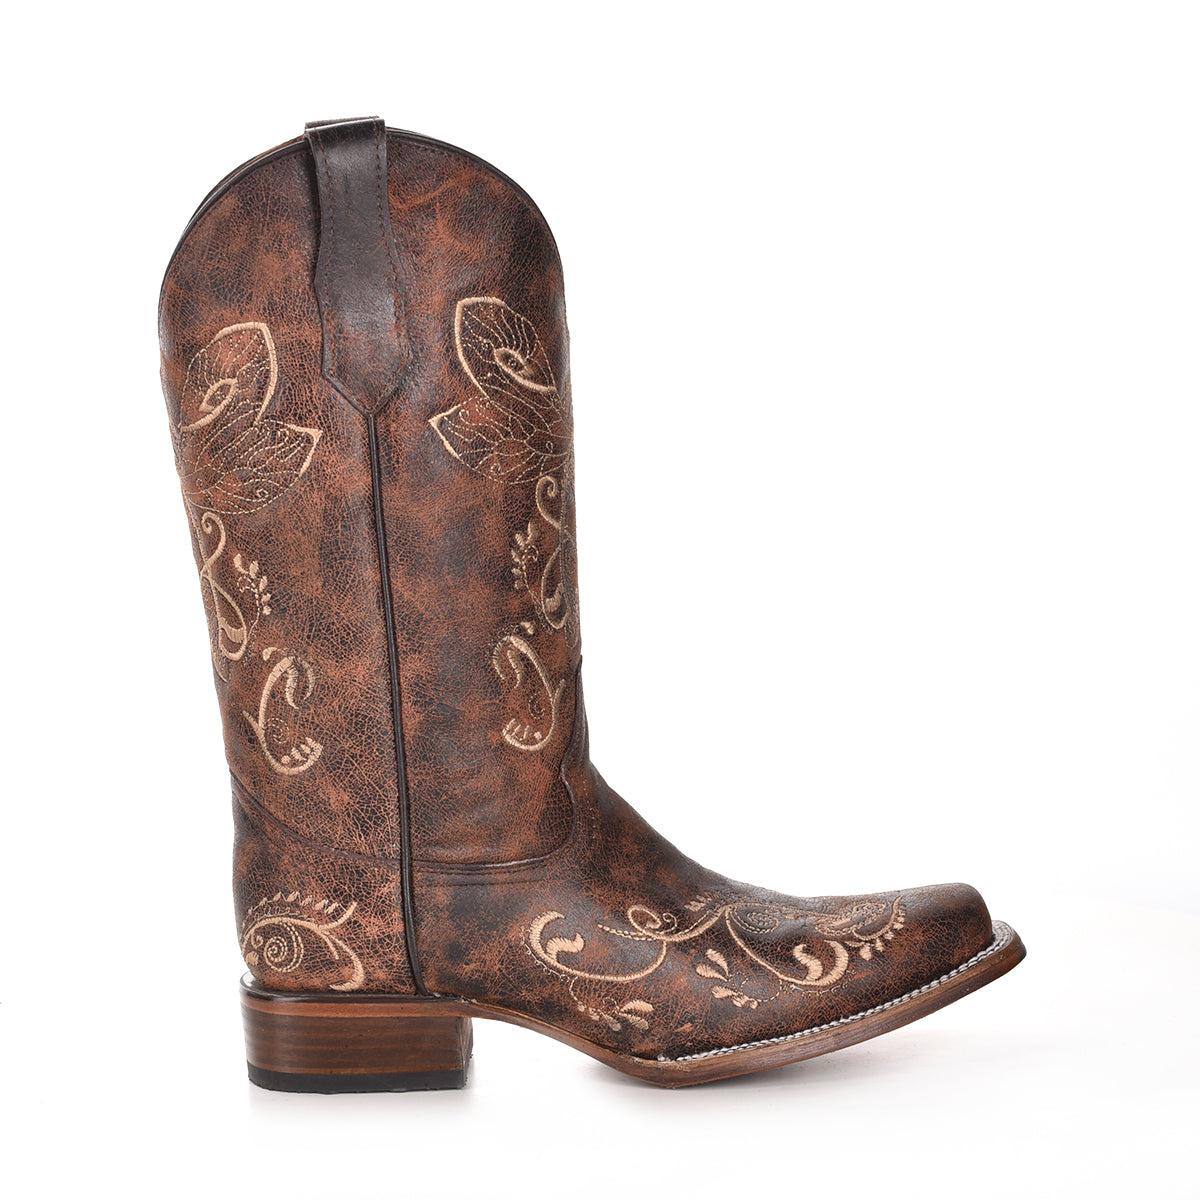 LD Distressed Brown-Bone Dragonfly Embroidery Sq. Toe Circle G by Corral